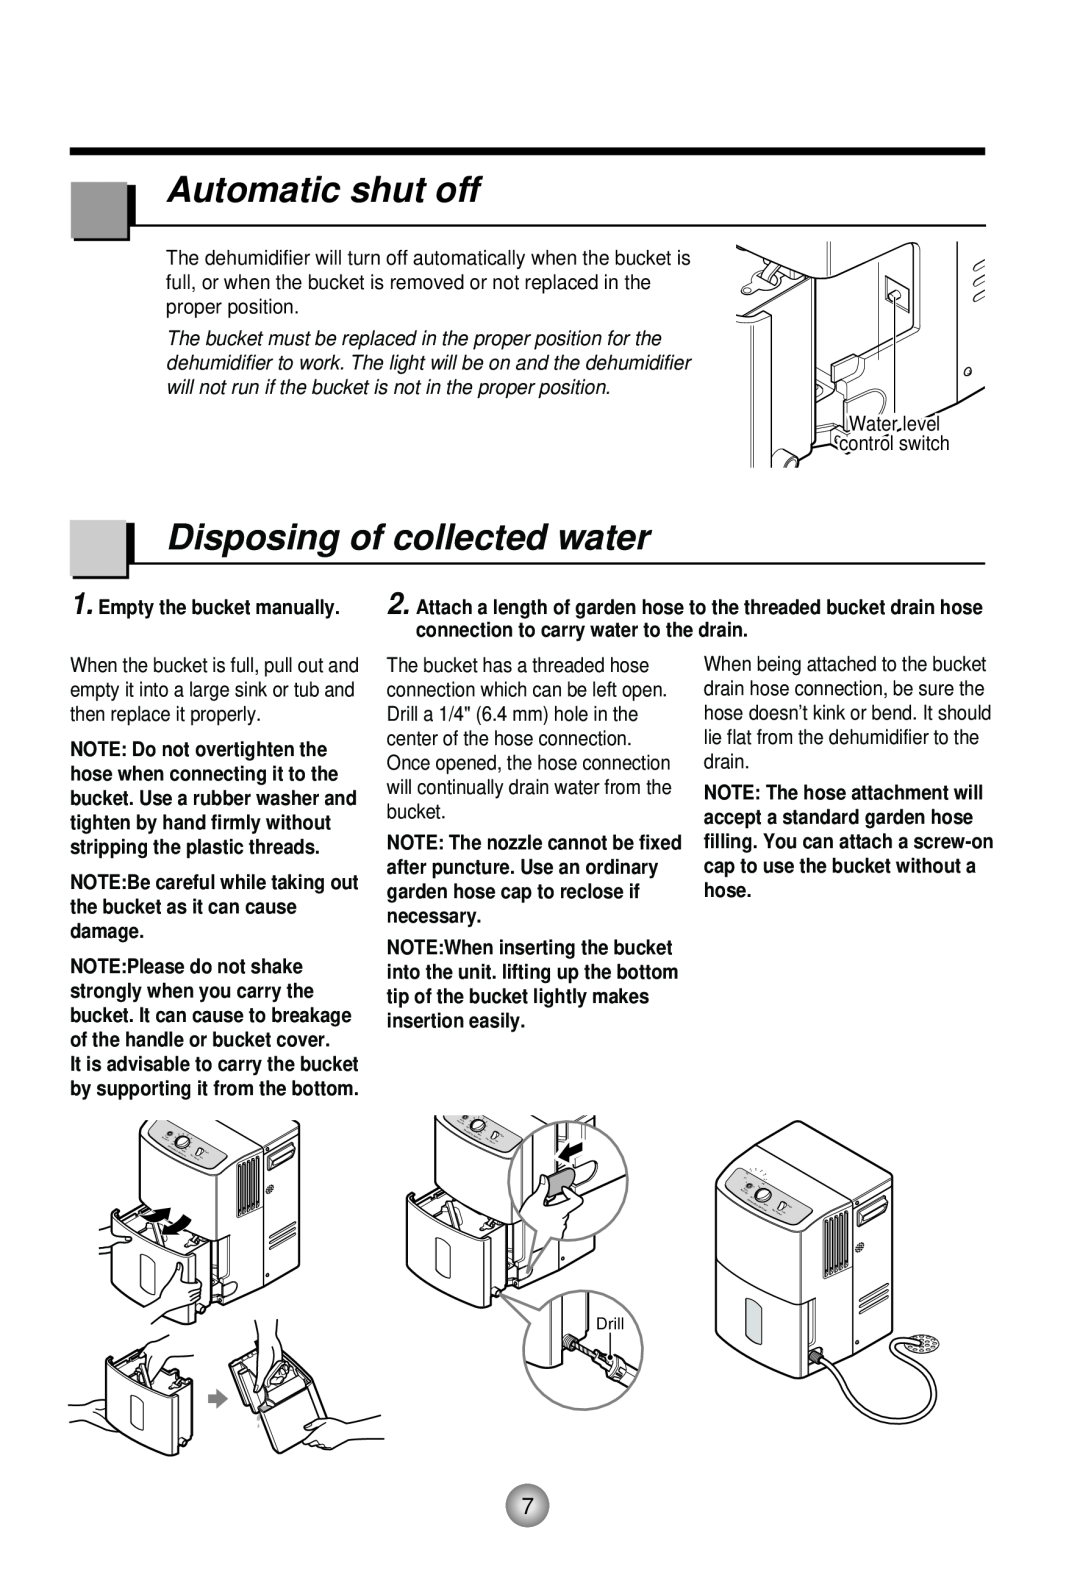 Goldstar DH30, DH50, DH40 owner manual Automatic shut off, Disposing of collected water 